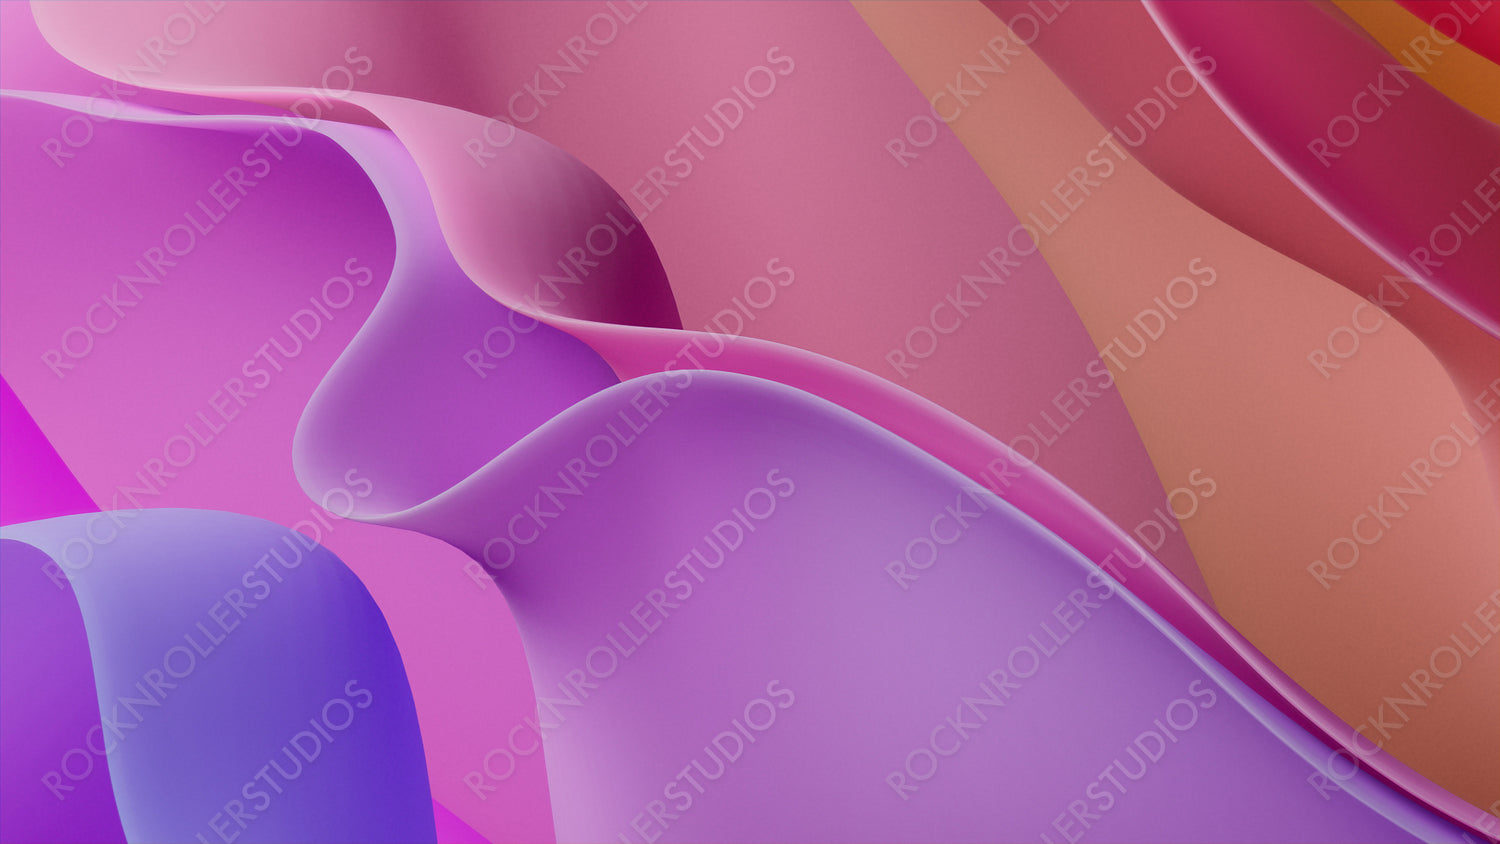 Modern 3D Design Background, with Wavy, Abstract Pink and Violet Surfaces. 3D Render.